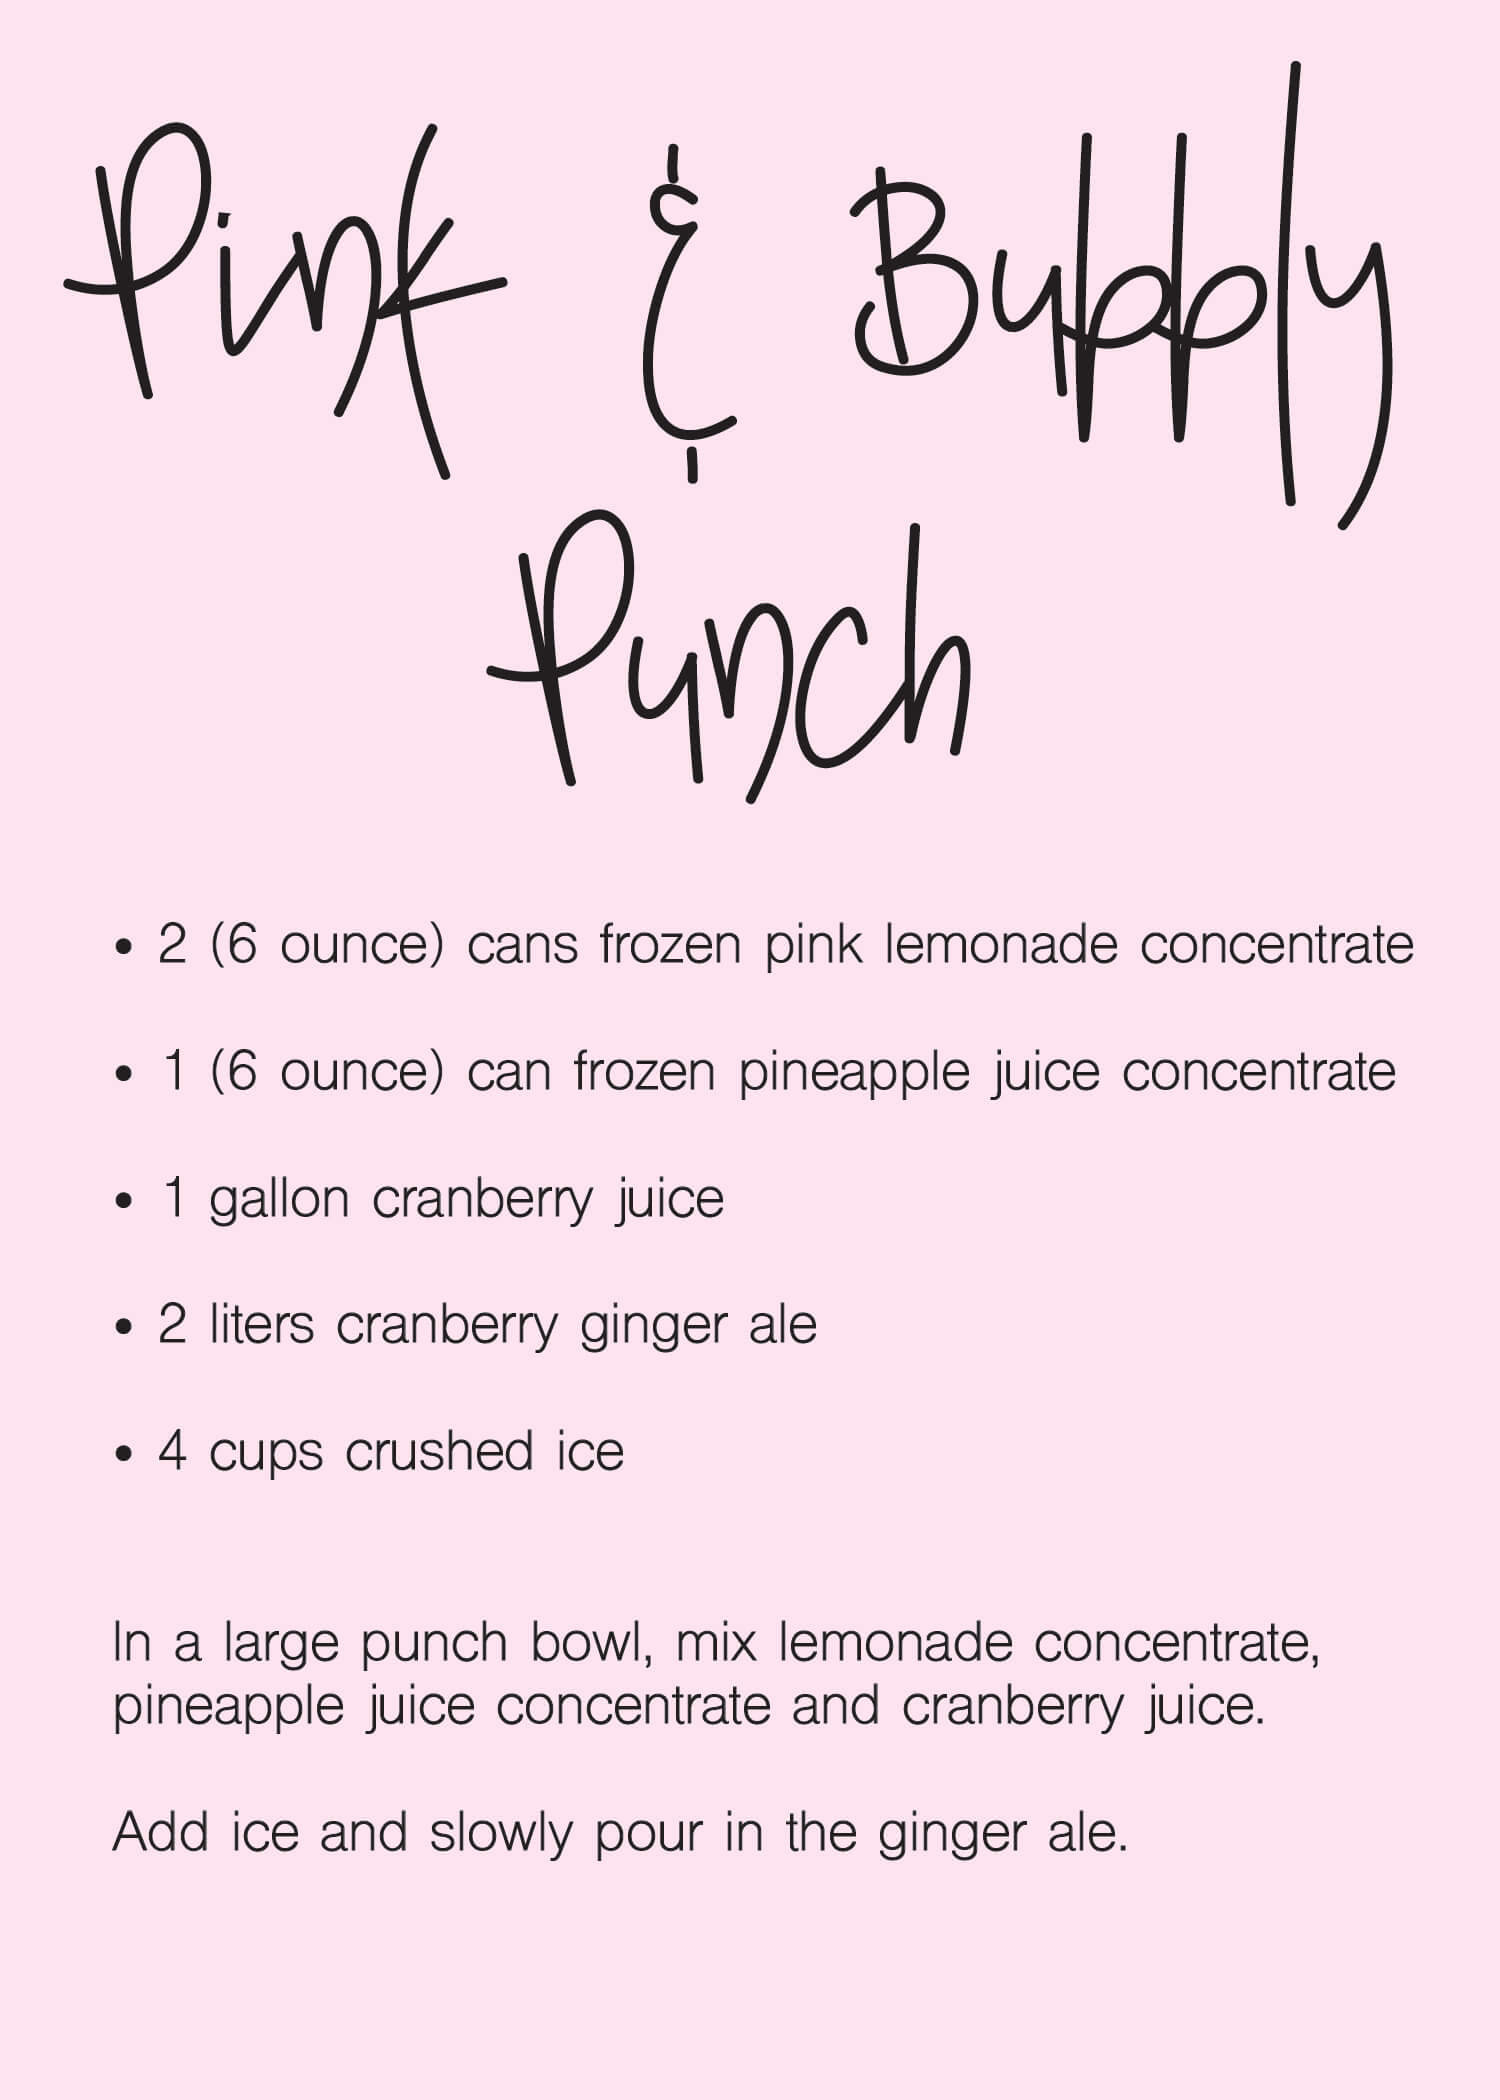 Pink Lemonade Punch Recipes For Baby Shower
 17 Best Baby Shower Punch Recipes Blue & Pink Punch Ideas